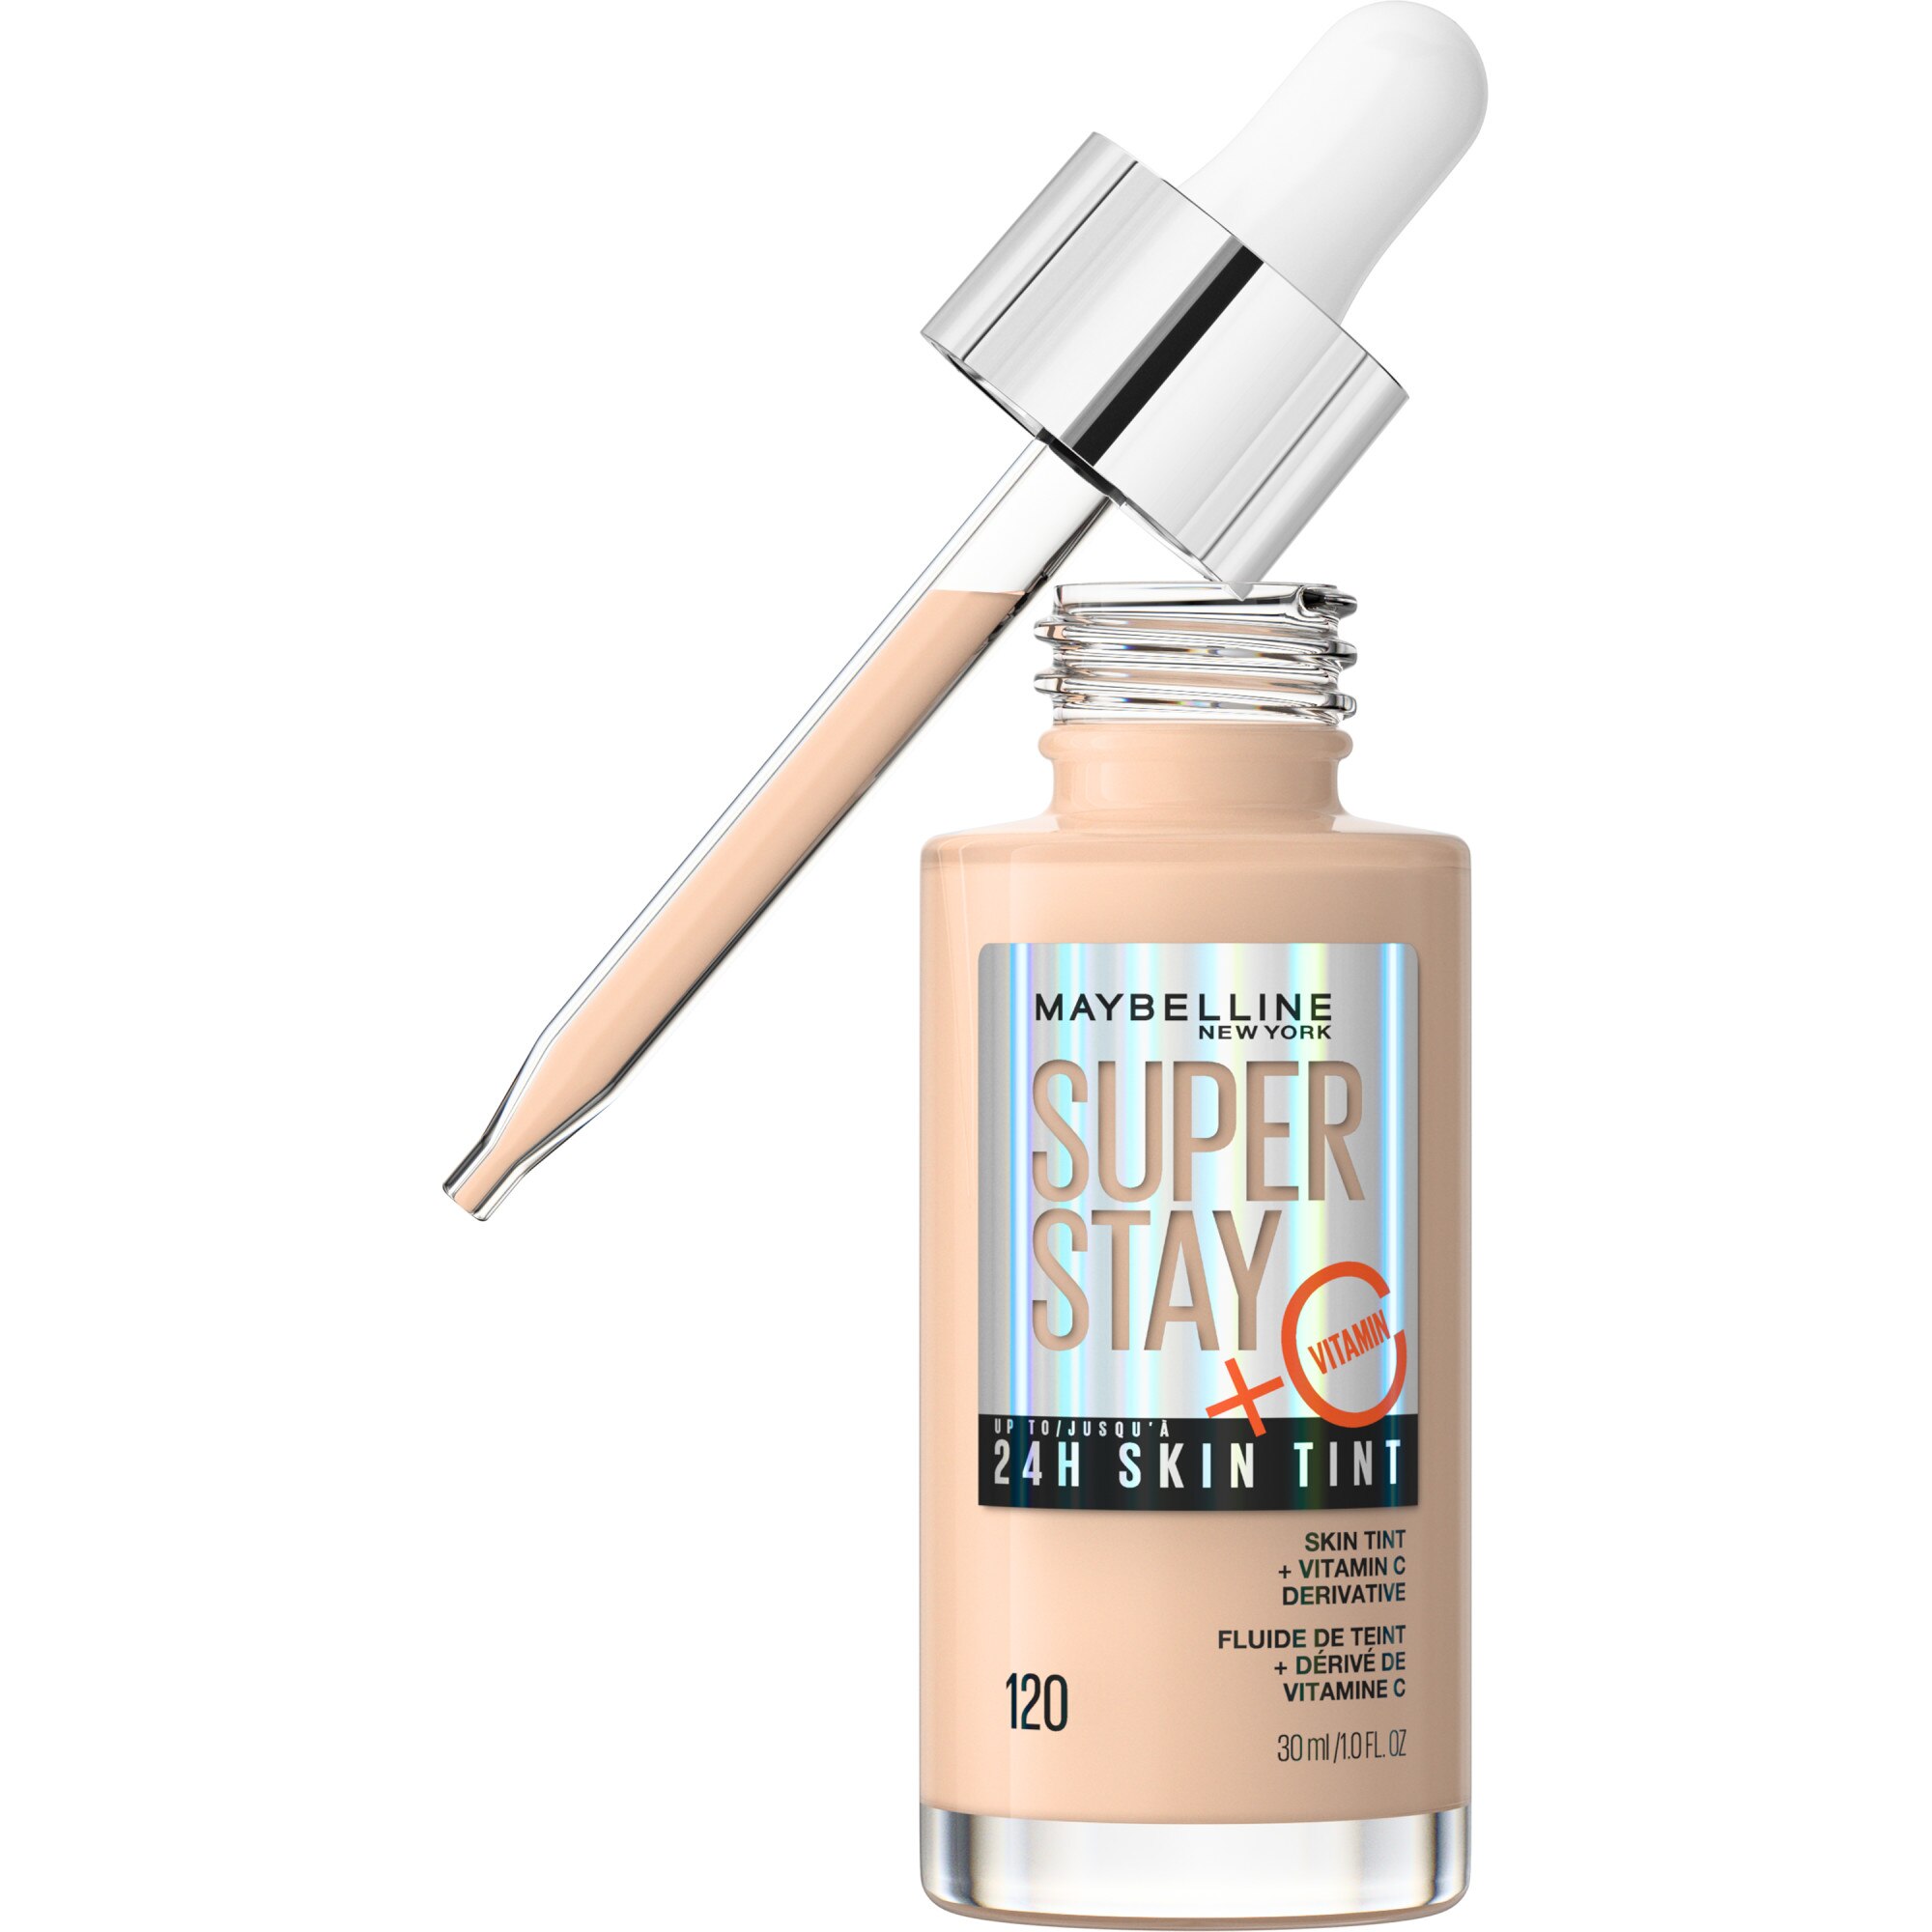 Maybelline New York Super Stay Up To 24HR Skin Tint With Vitamin C, 120, 1 Oz , CVS